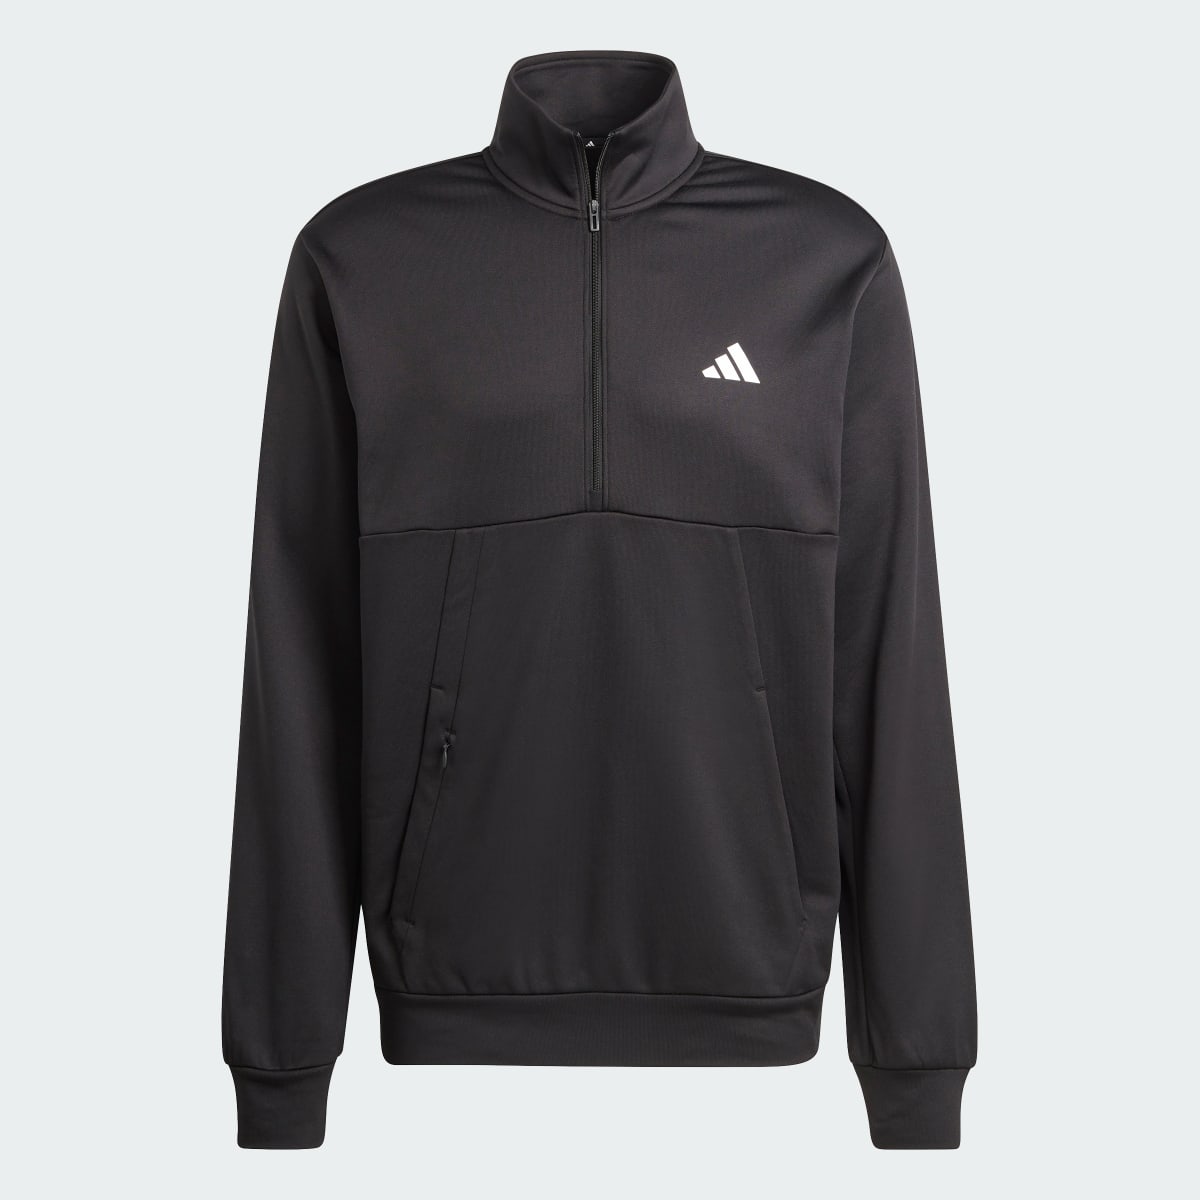 Adidas Game and Go Small Logo Training 1/4 Zip Top. 6